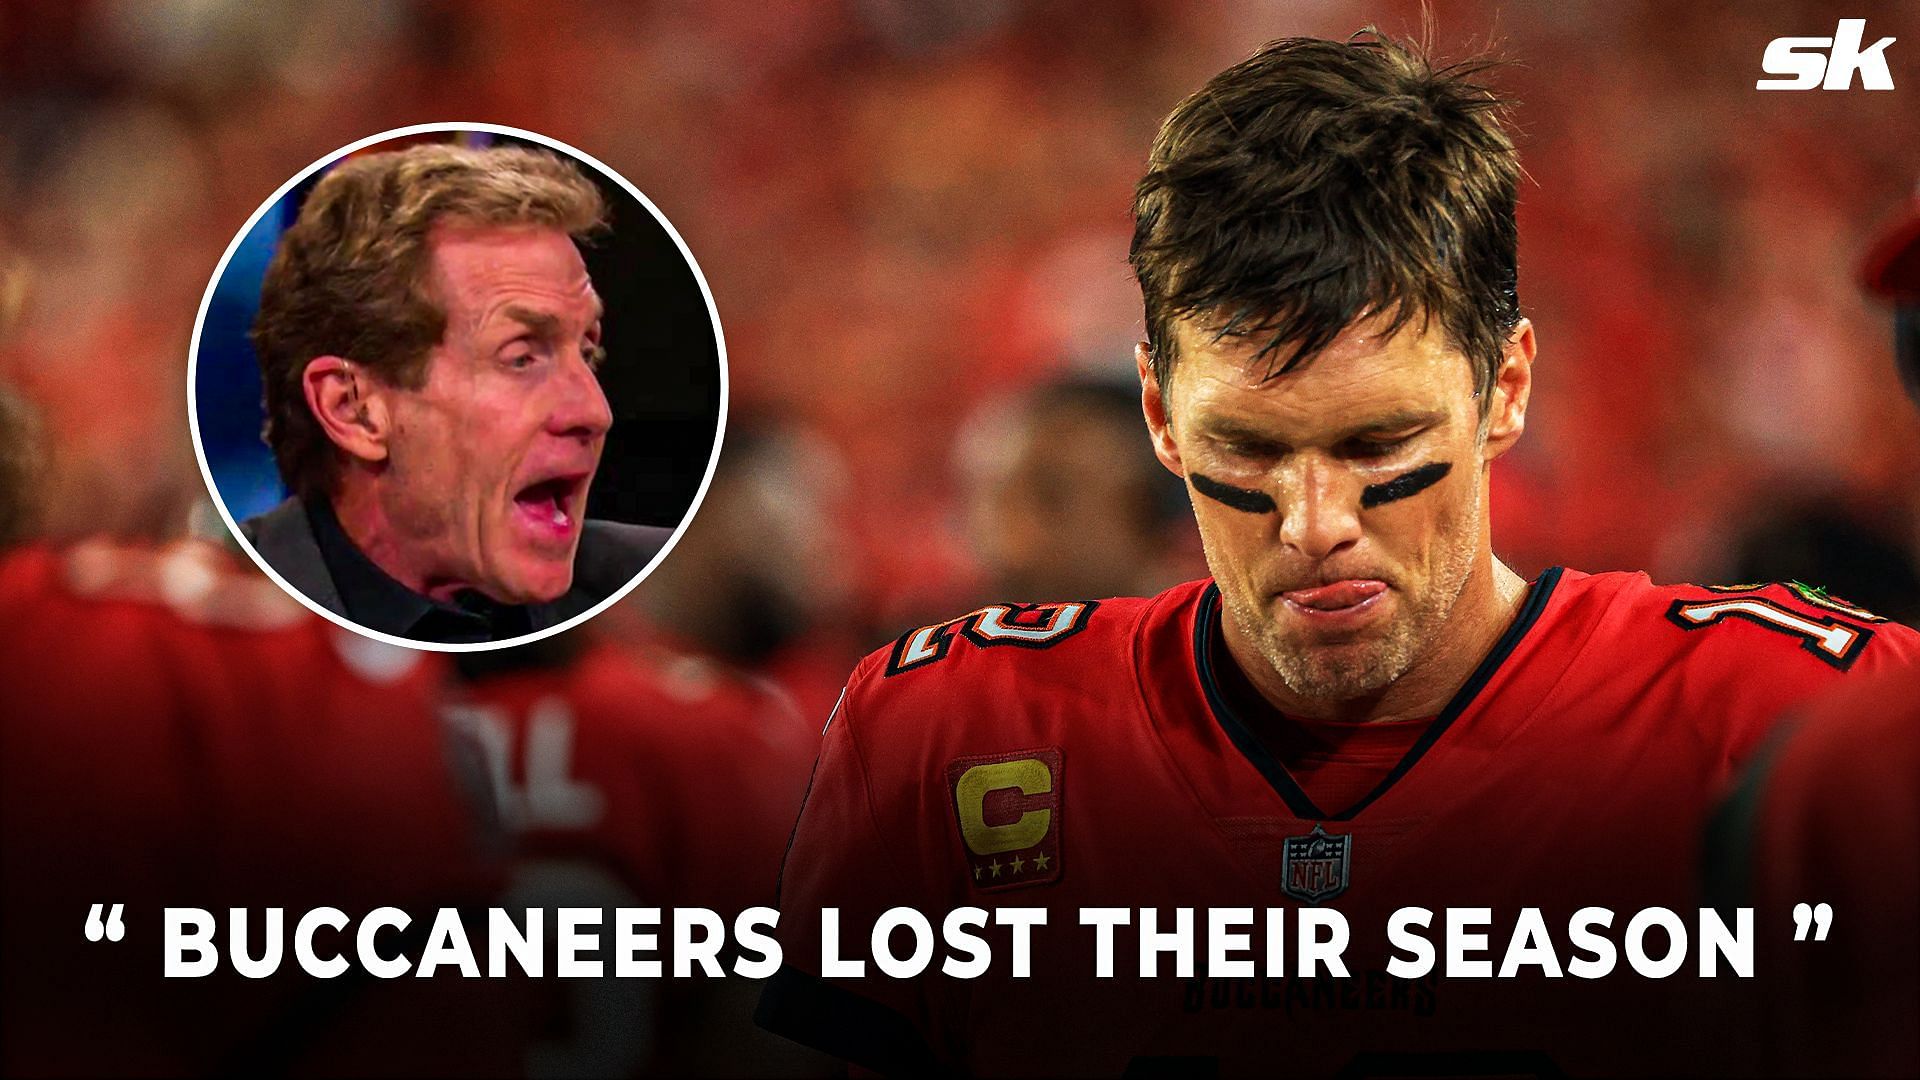 Skip Bayless has suggested that the Bucs&#039; season could very well be over